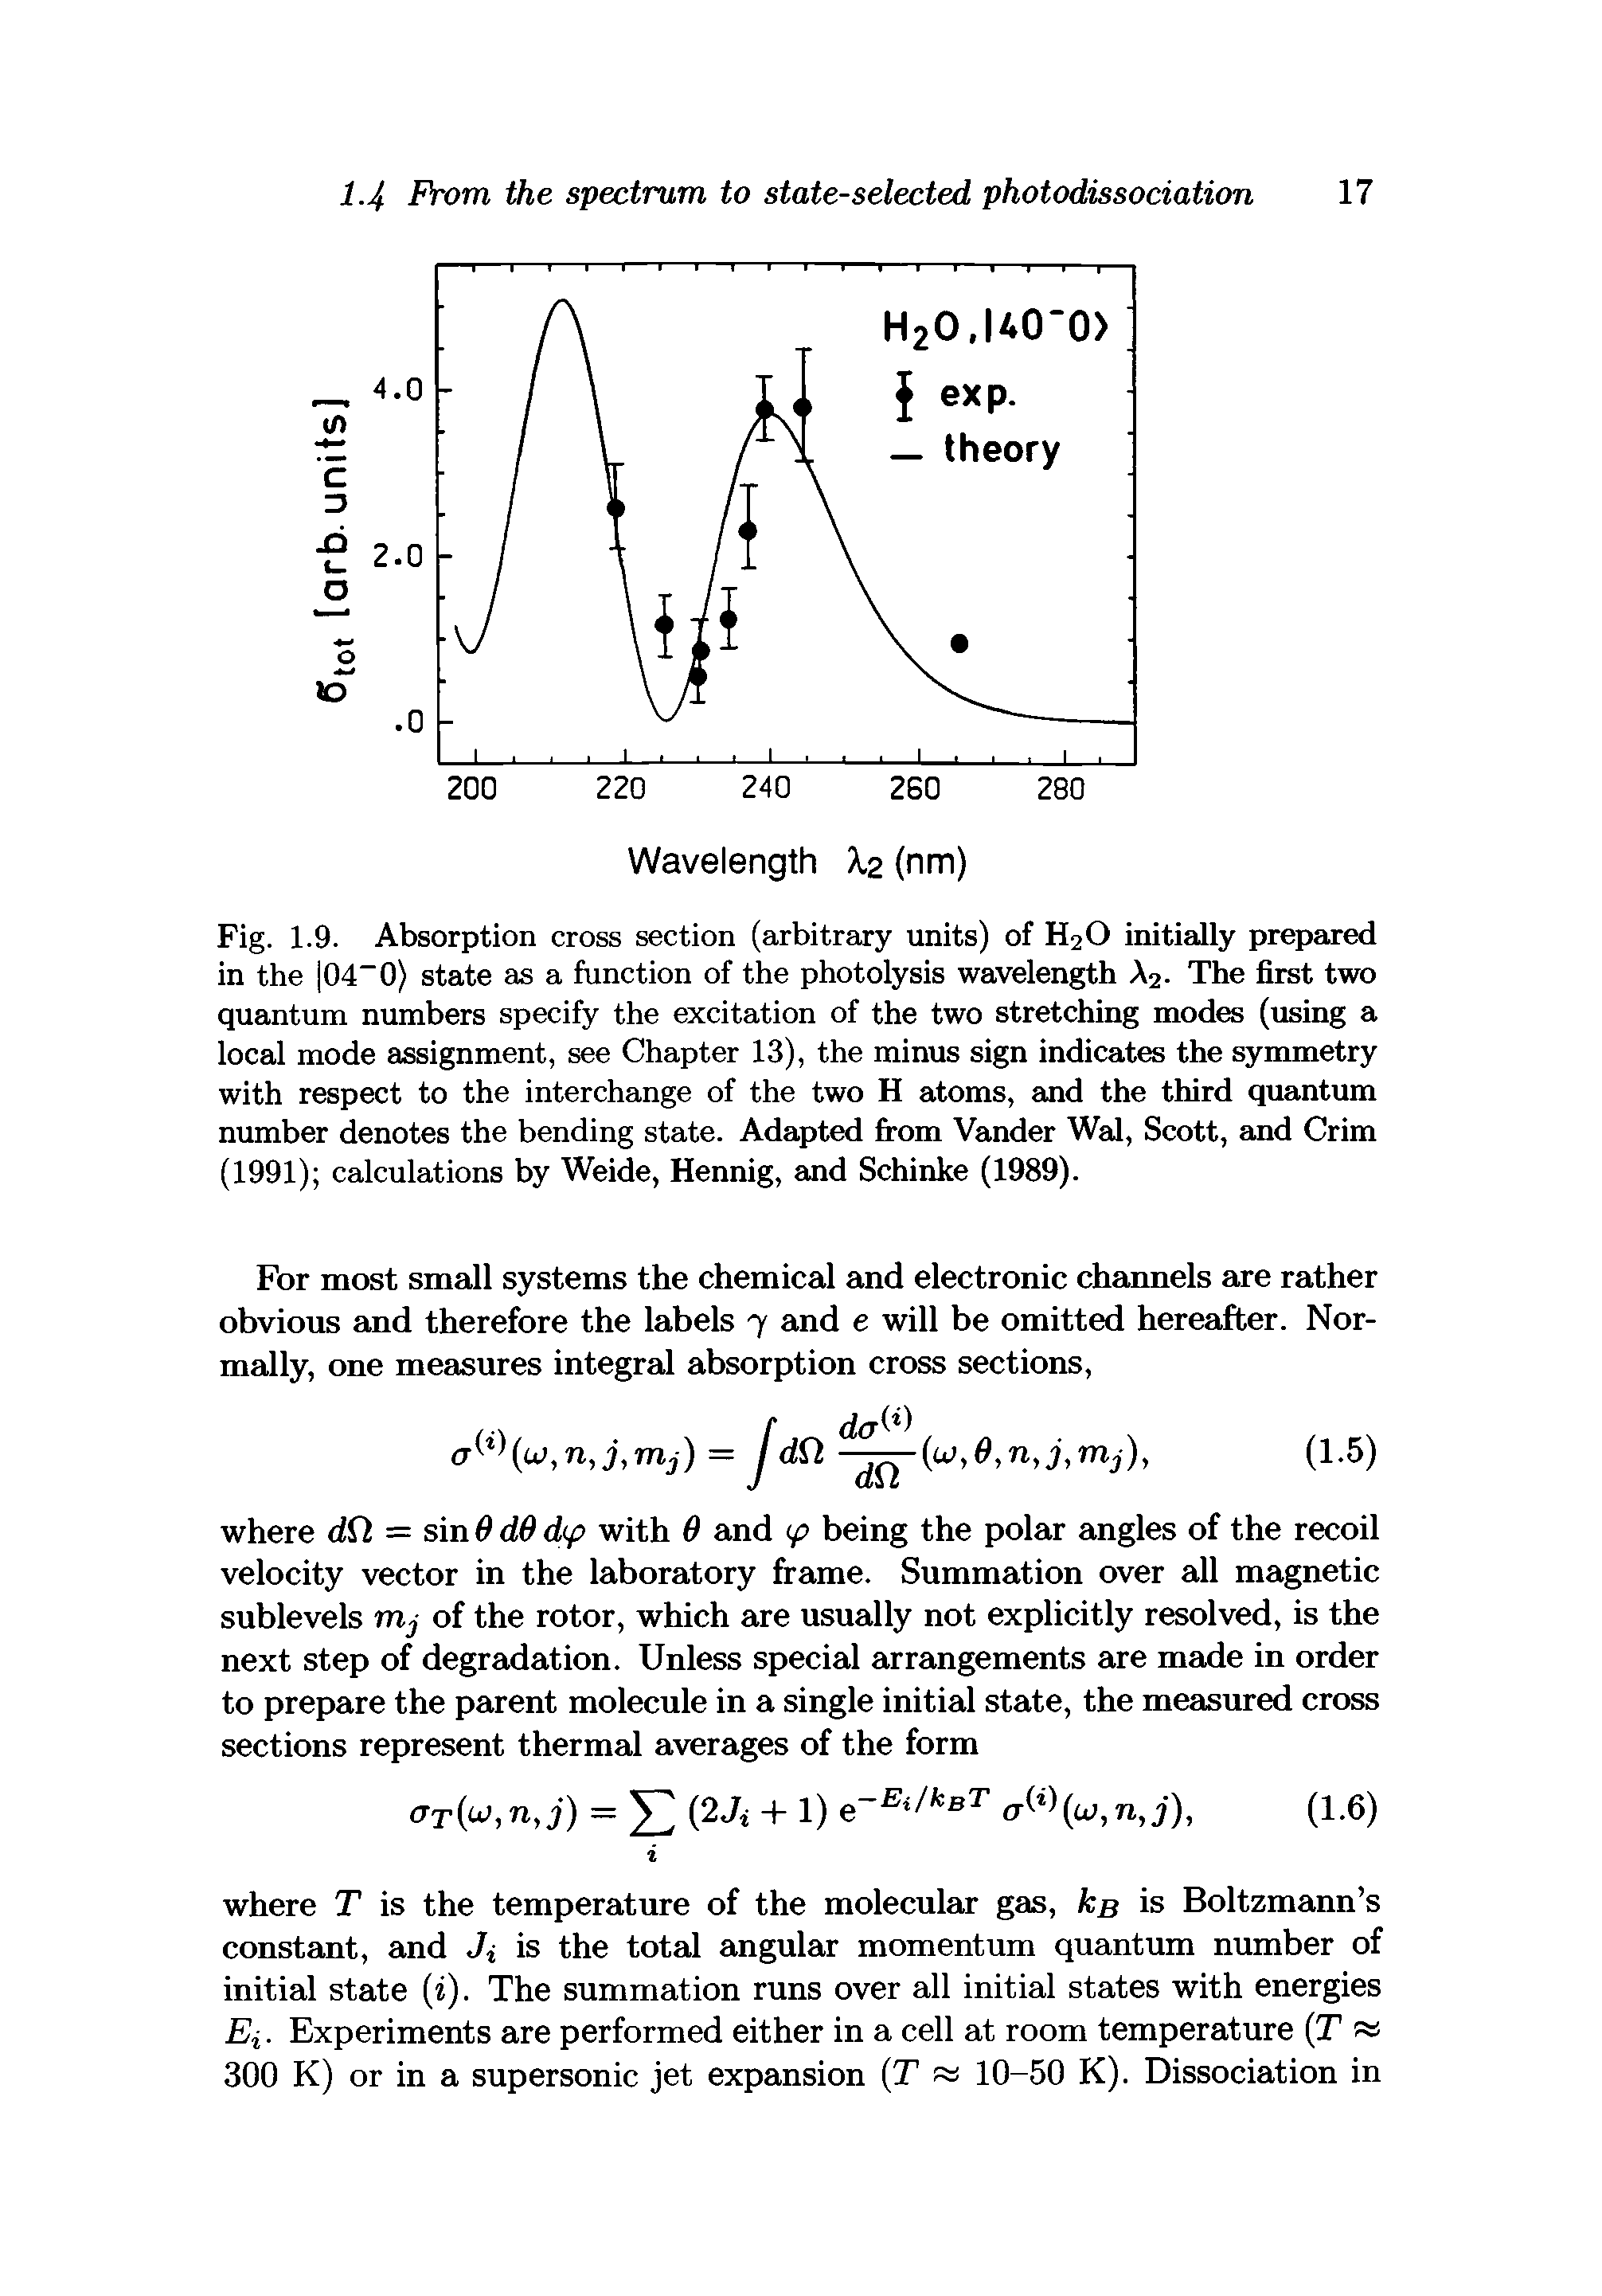 Fig. 1.9. Absorption cross section (arbitrary units) of H20 initially prepared in the 04-0) state as a function of the photolysis wavelength A2. The first two quantum numbers specify the excitation of the two stretching modes (using a local mode assignment, see Chapter 13), the minus sign indicates the symmetry with respect to the interchange of the two H atoms, and the third quantum number denotes the bending state. Adapted from Vander Wal, Scott, and Crim (1991) calculations by Weide, Hennig, and Schinke (1989).